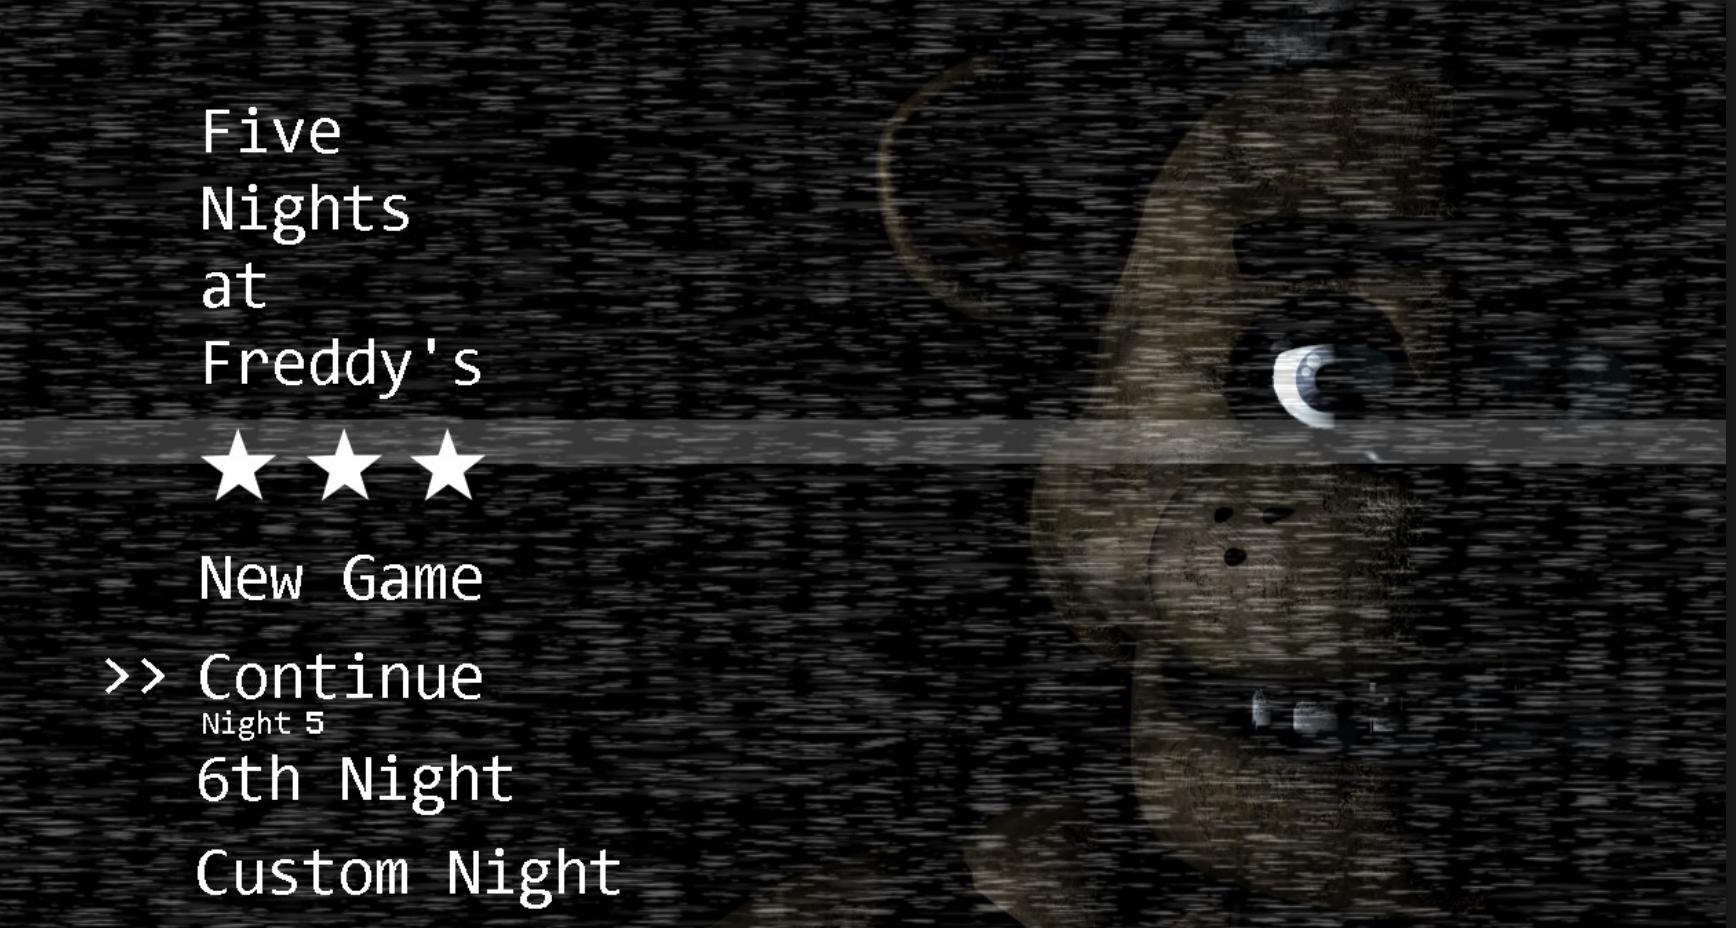 Fnaf 4 For Android Apk Download - roblox five night s at freddy s animatronics universe fnaf 4